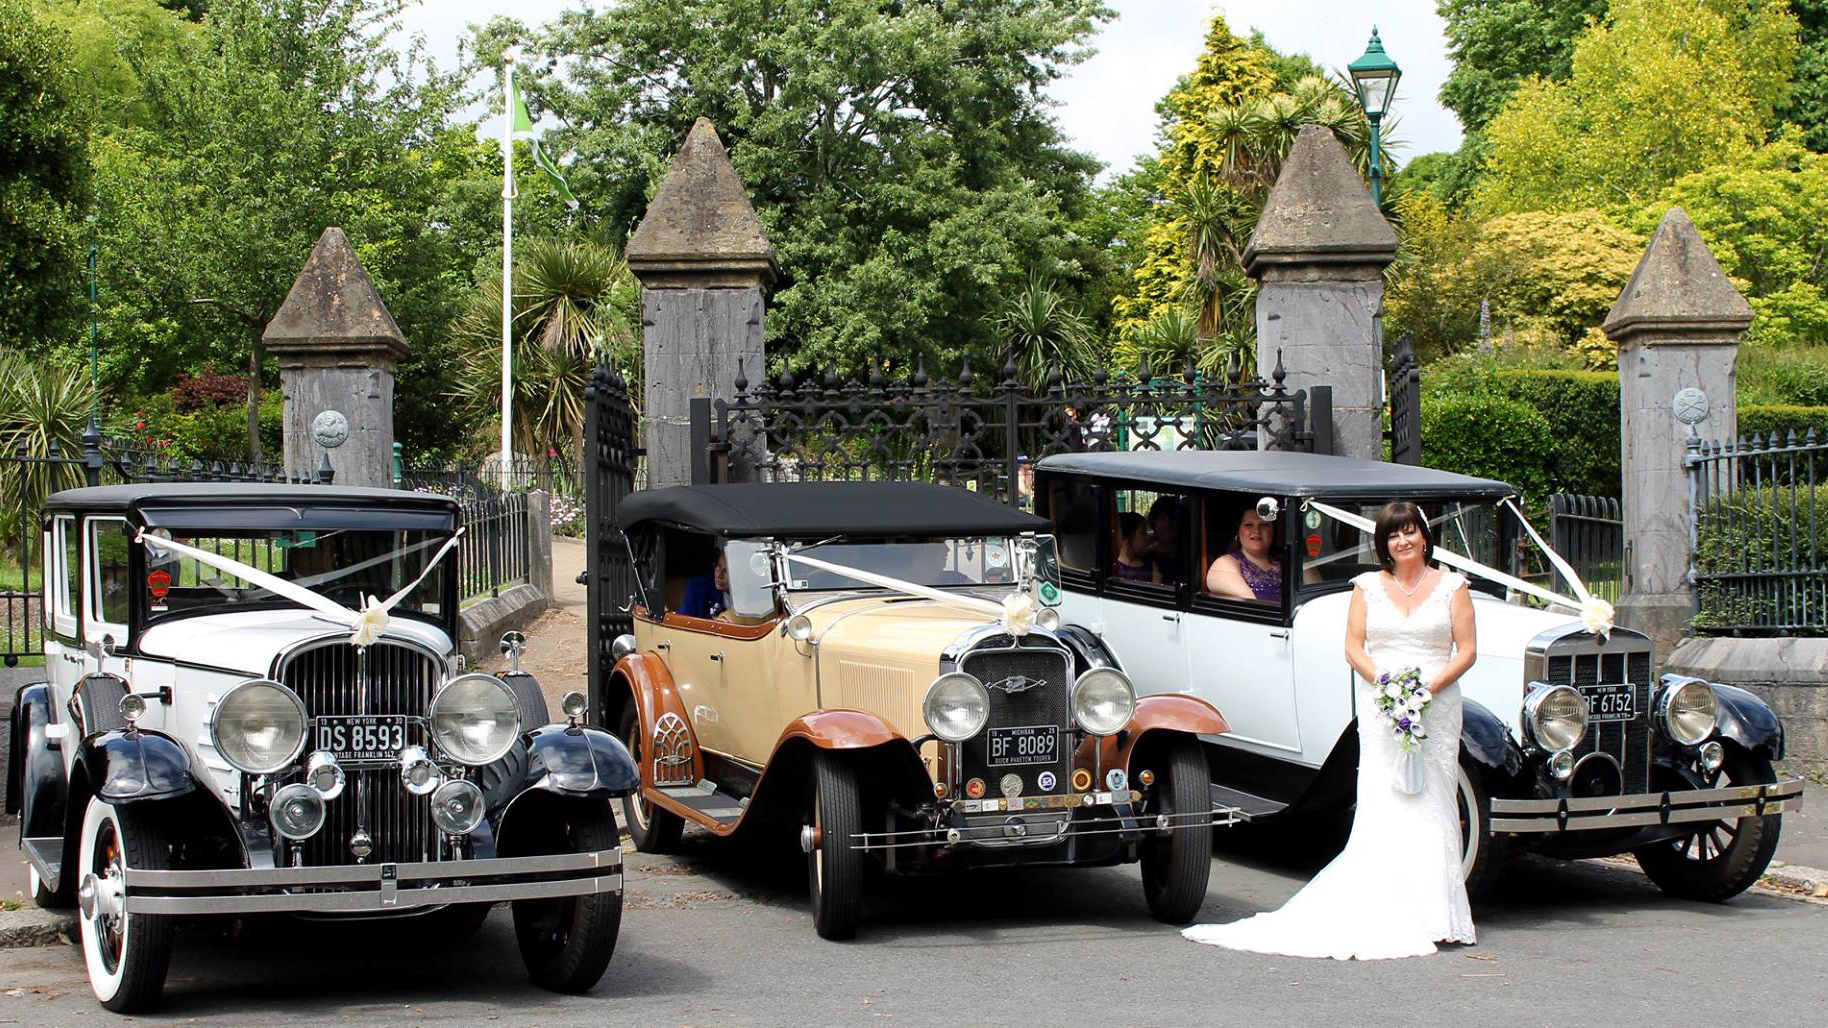 Three vintage wedding cars decorated with white ribbons at a local Bideford wedding. All three vehicles are parked side-by-side with bride wearing a white dress holding a bridal bo